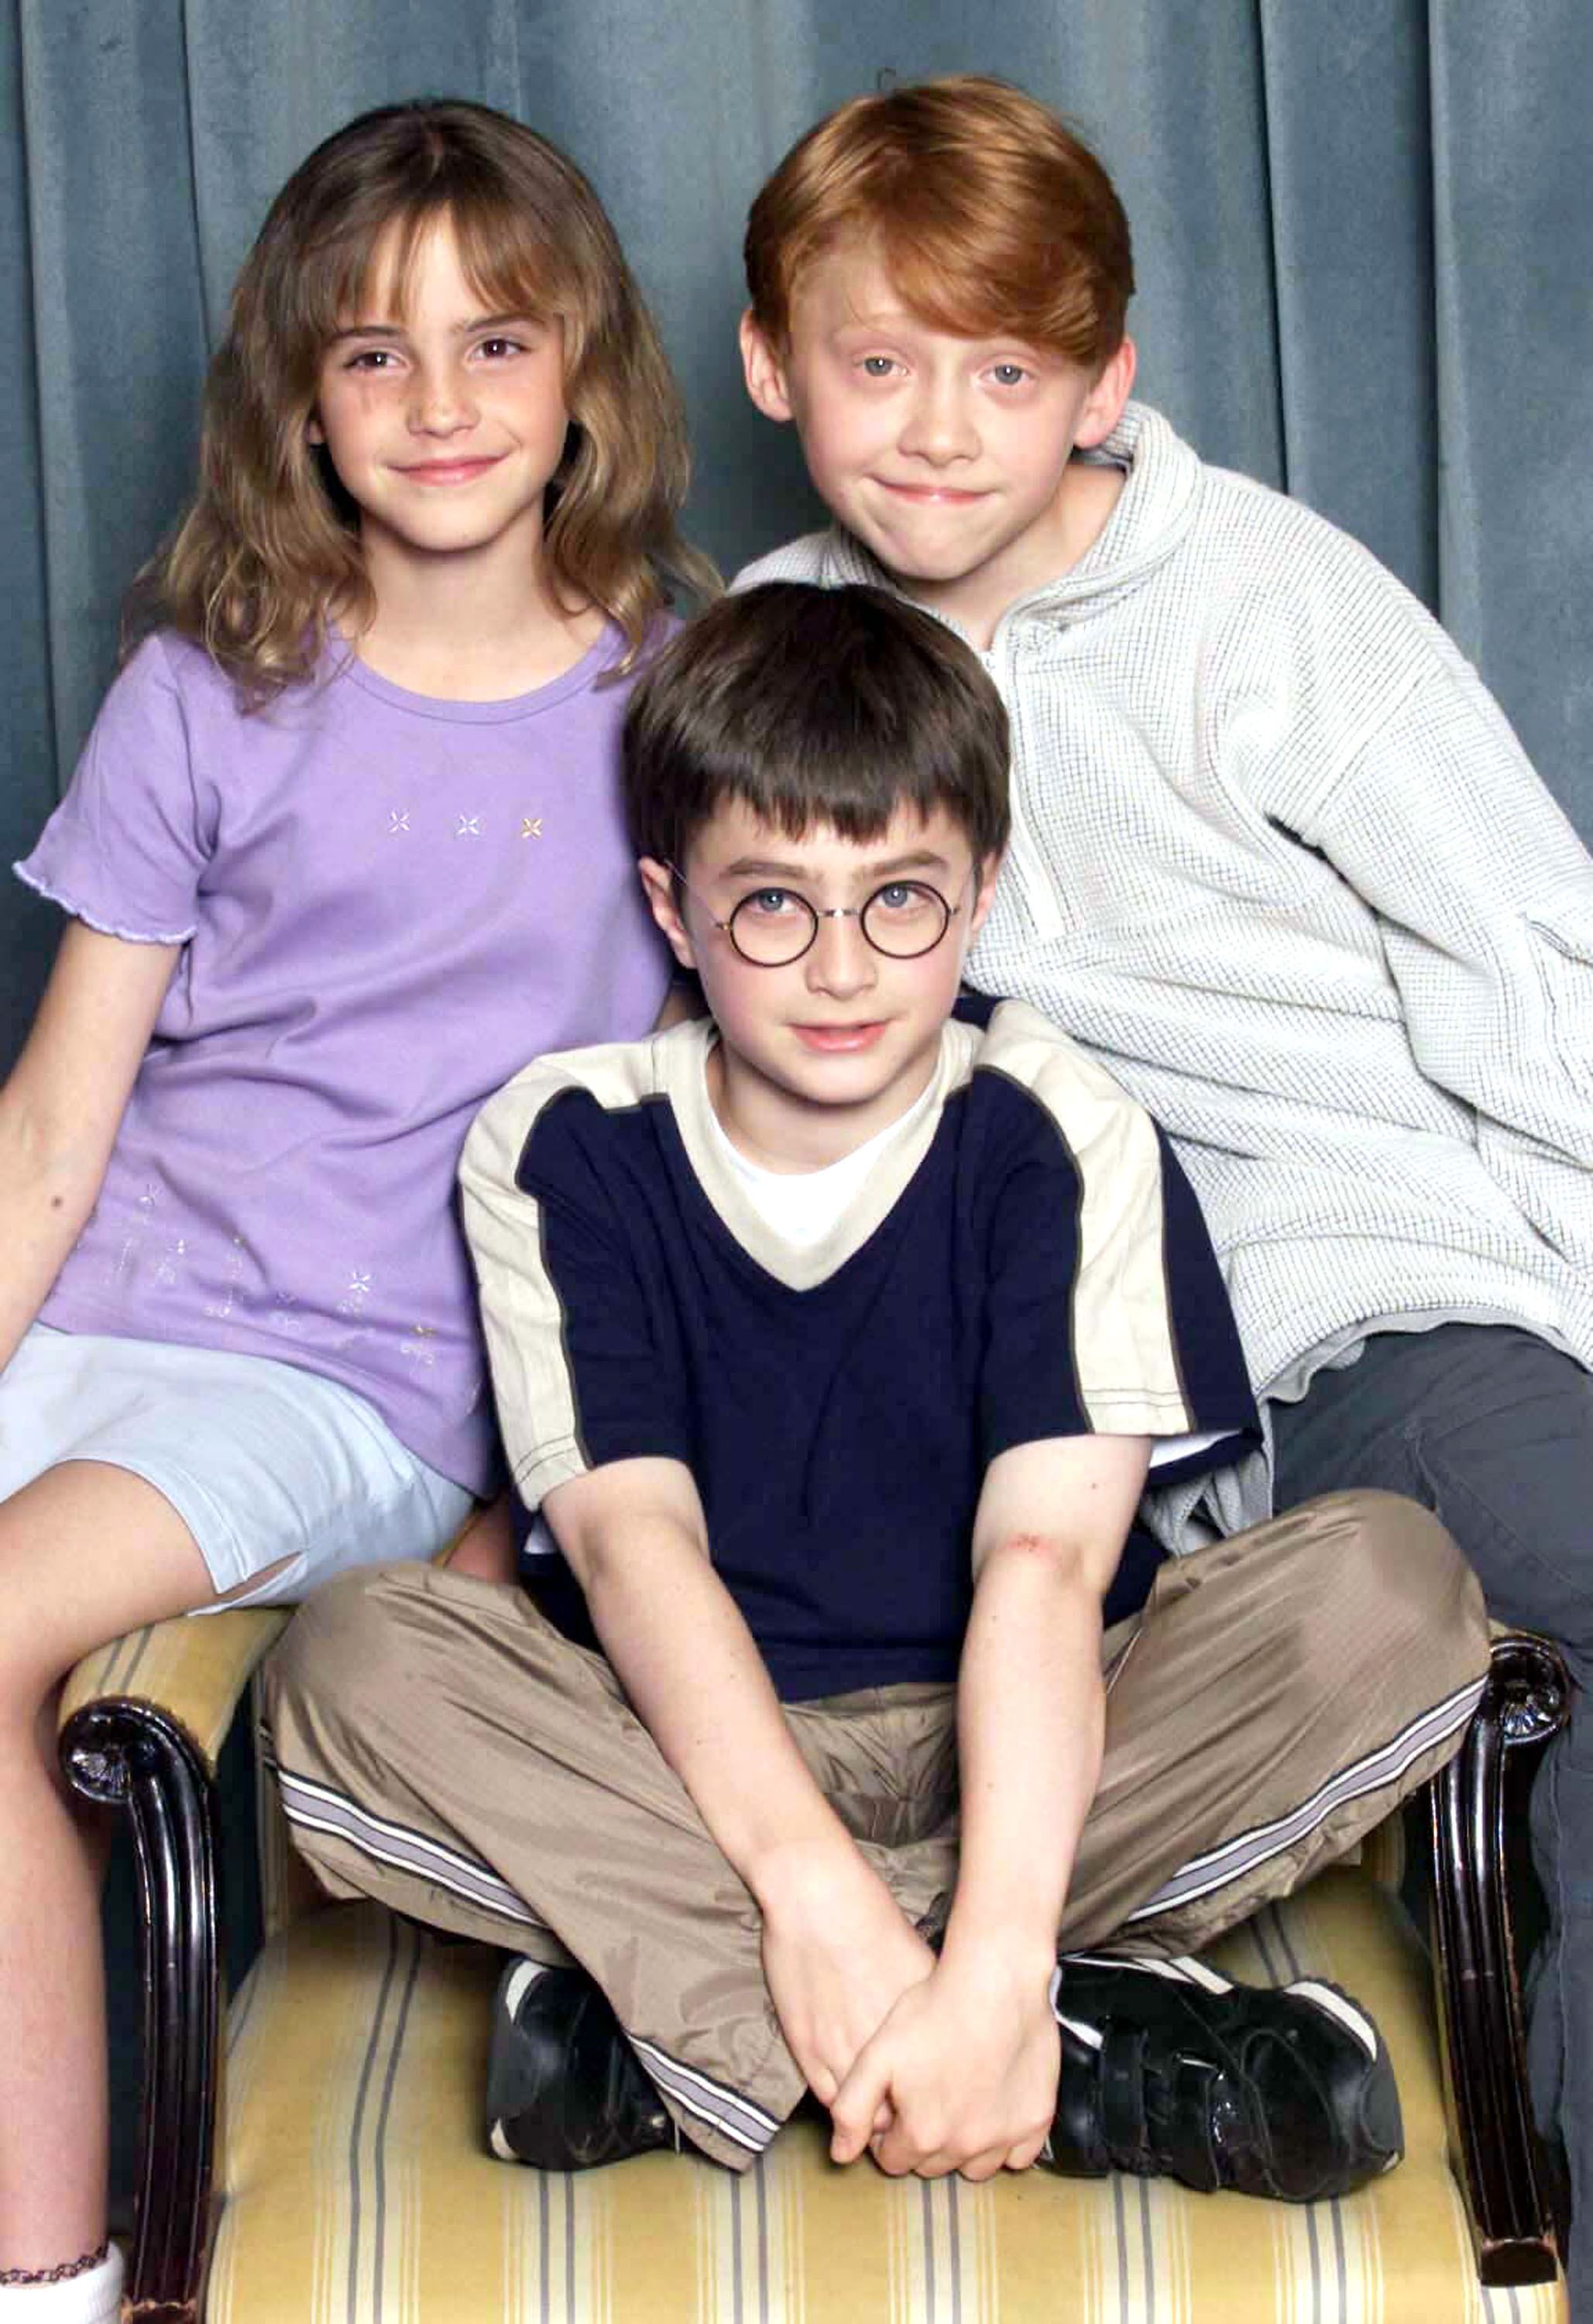 Emma Watson, Daniel Radcliffe, and Rupert Grint at a photocall for "Harry Potter" in London, England on August 23, 2000 | Source: Getty Images